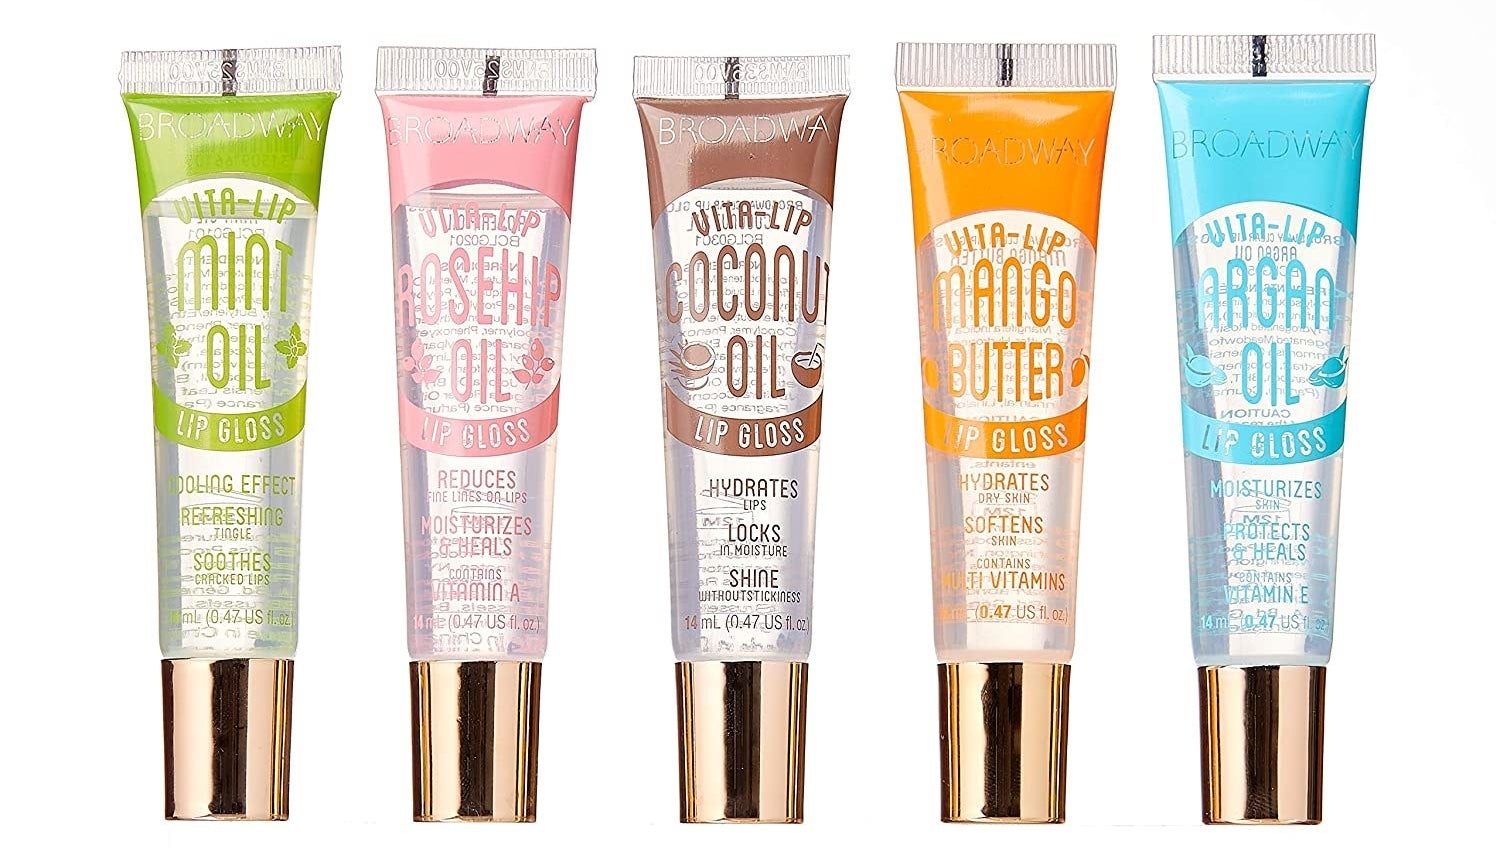 the five tubes of lip gloss